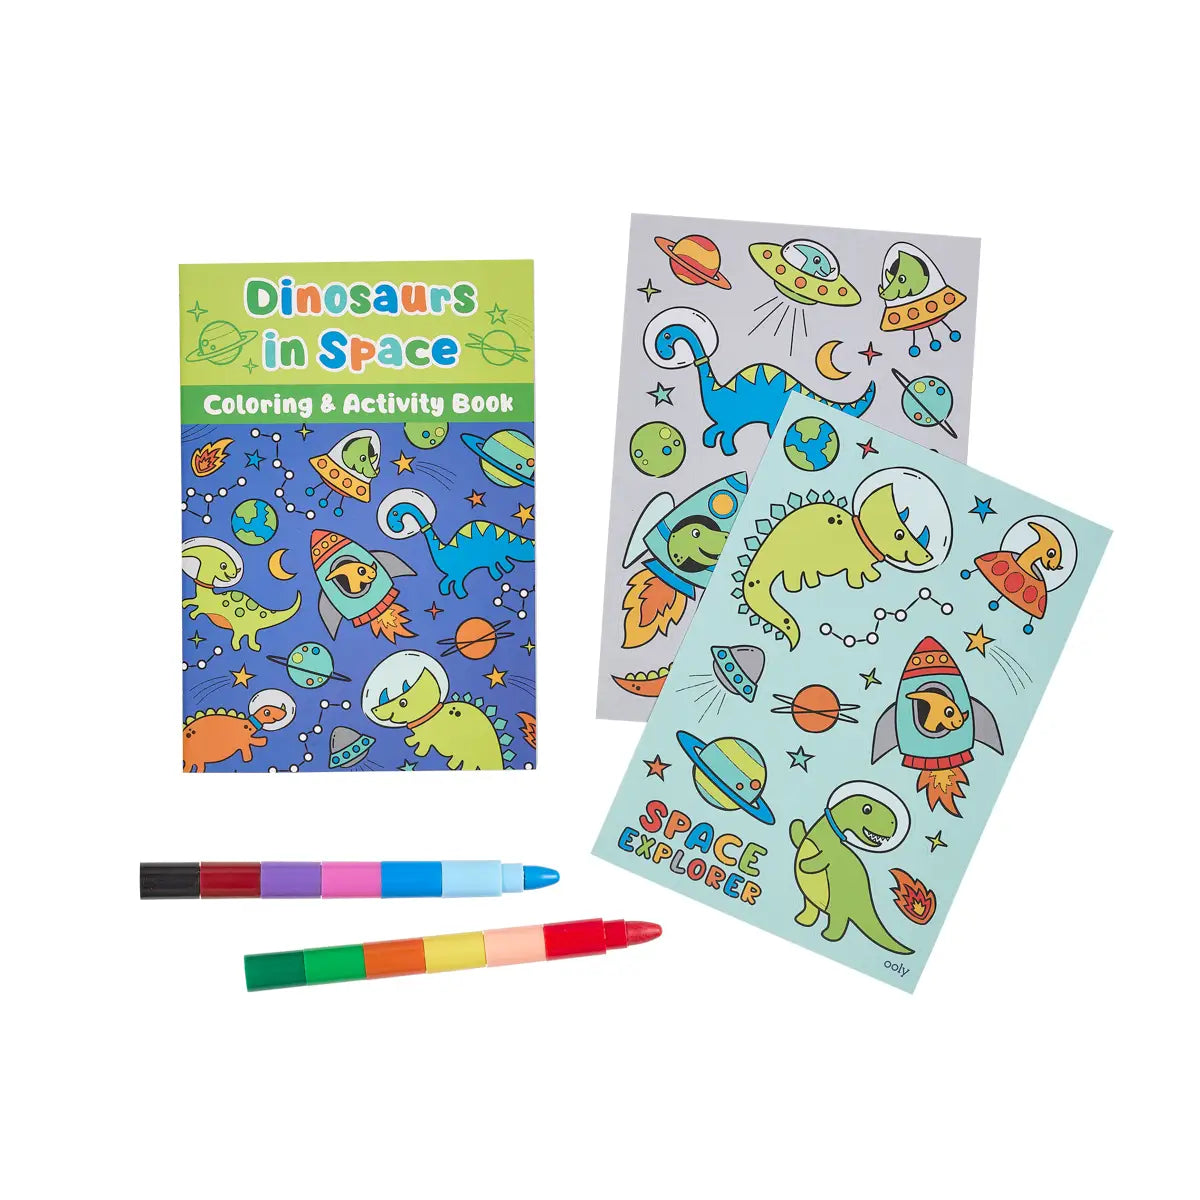 Mini Traveler Coloring + Activity Kit - Dinosaurs in Space